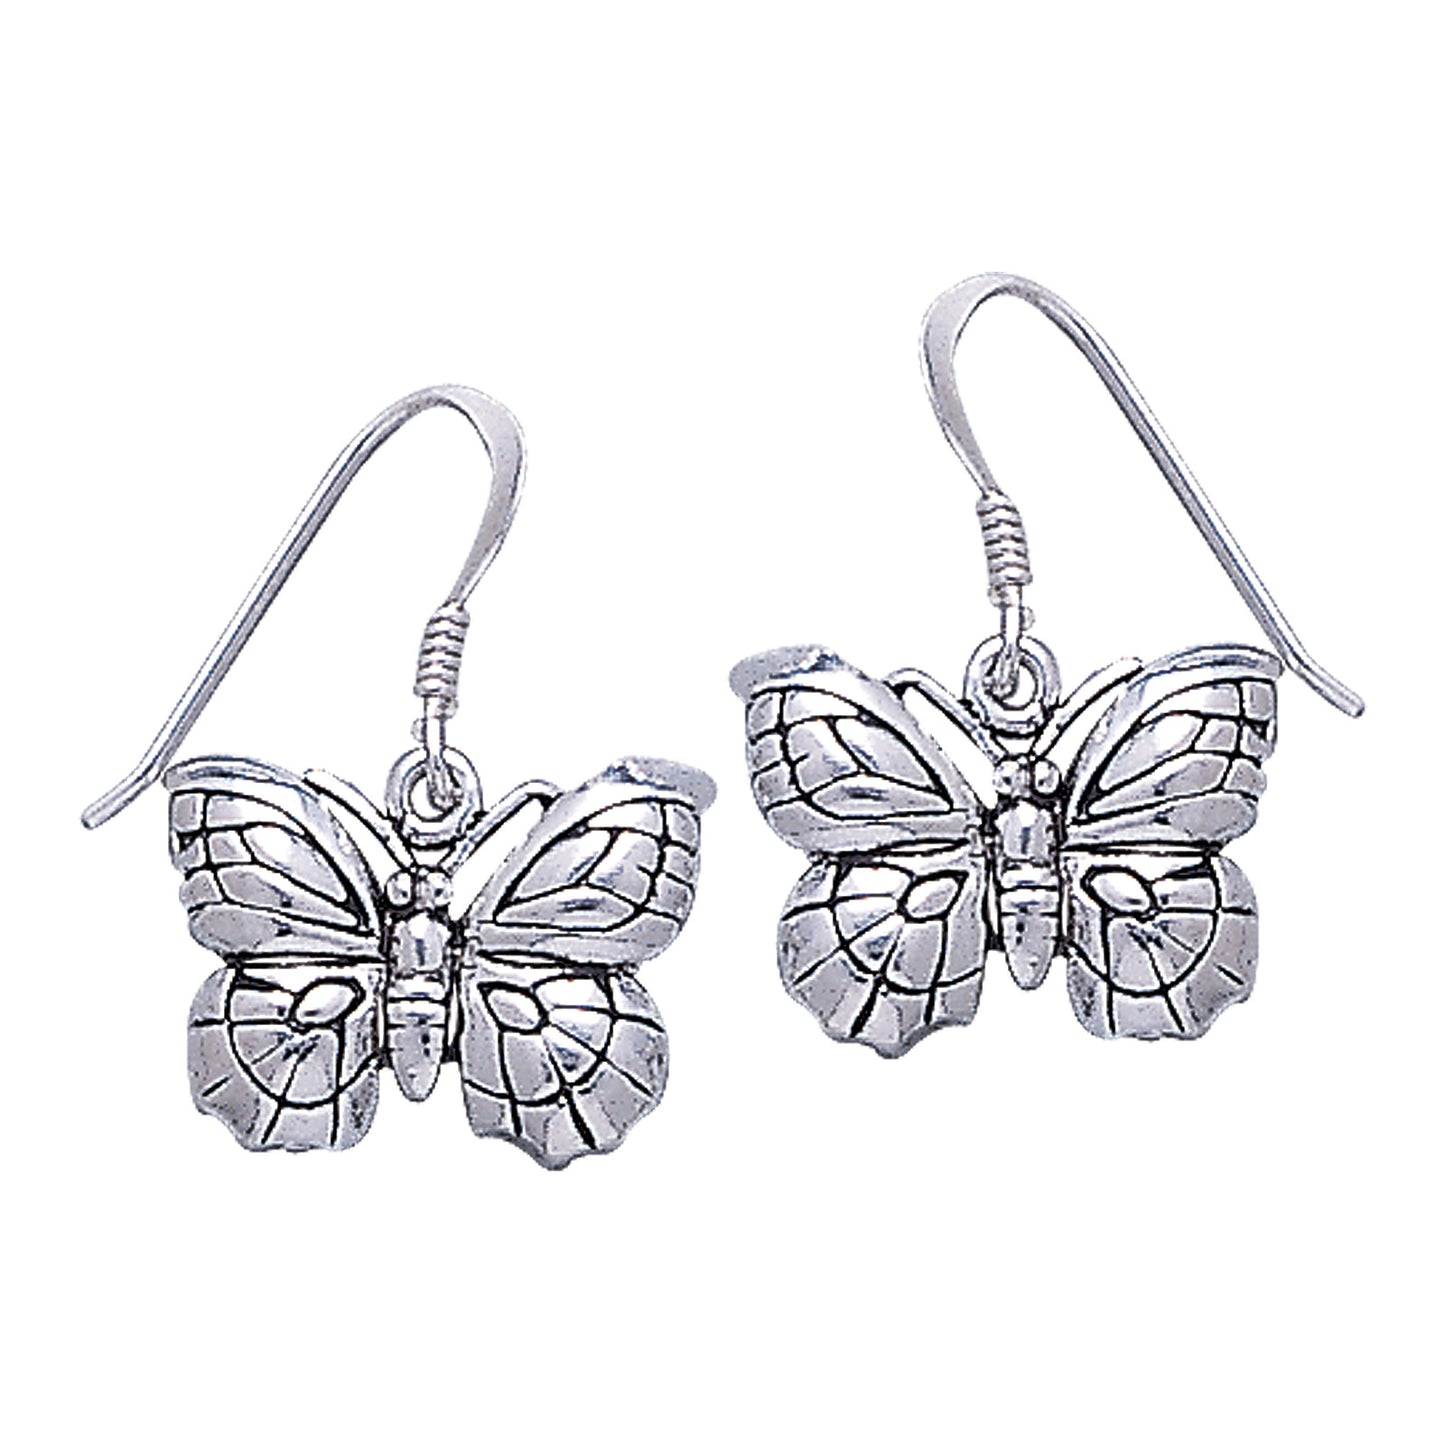 Detailed Curved Butterfly Sterling Silver Hook Earrings - Silver Insanity